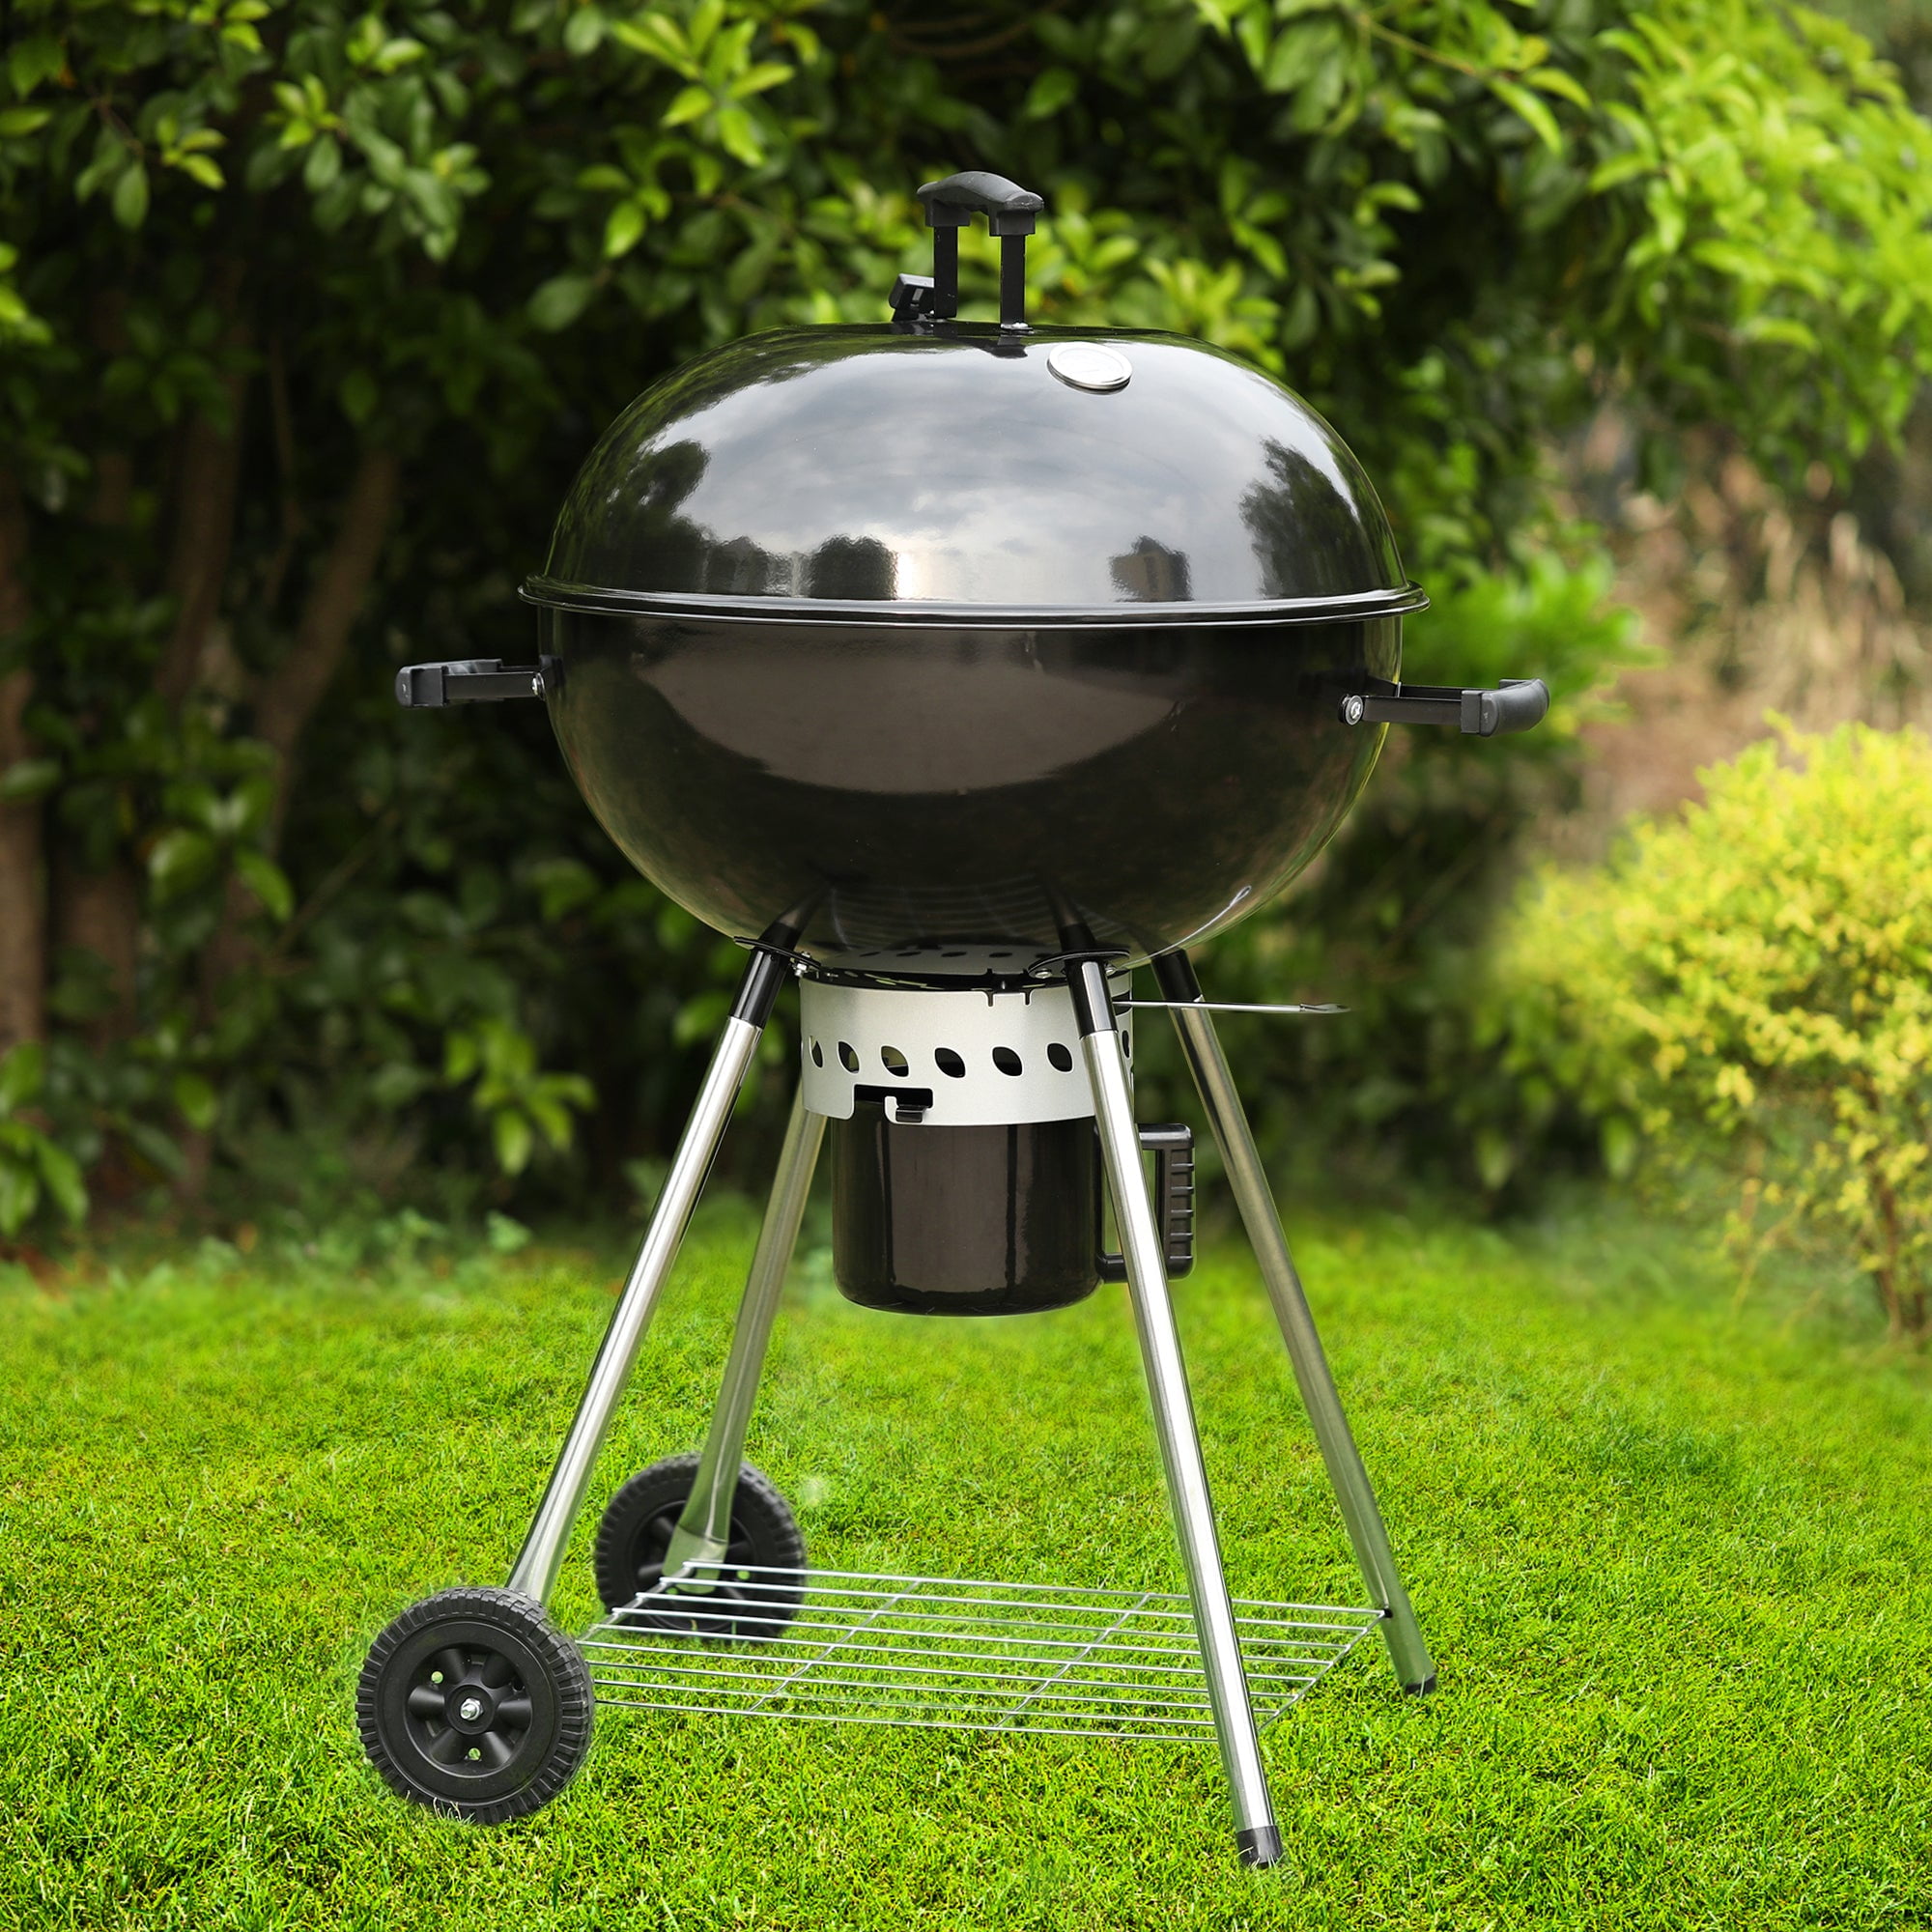 Sophia & William Portable 22" Kettle Charcoal BBQ Grill with Ash Catcher Wheels - Walmart.com